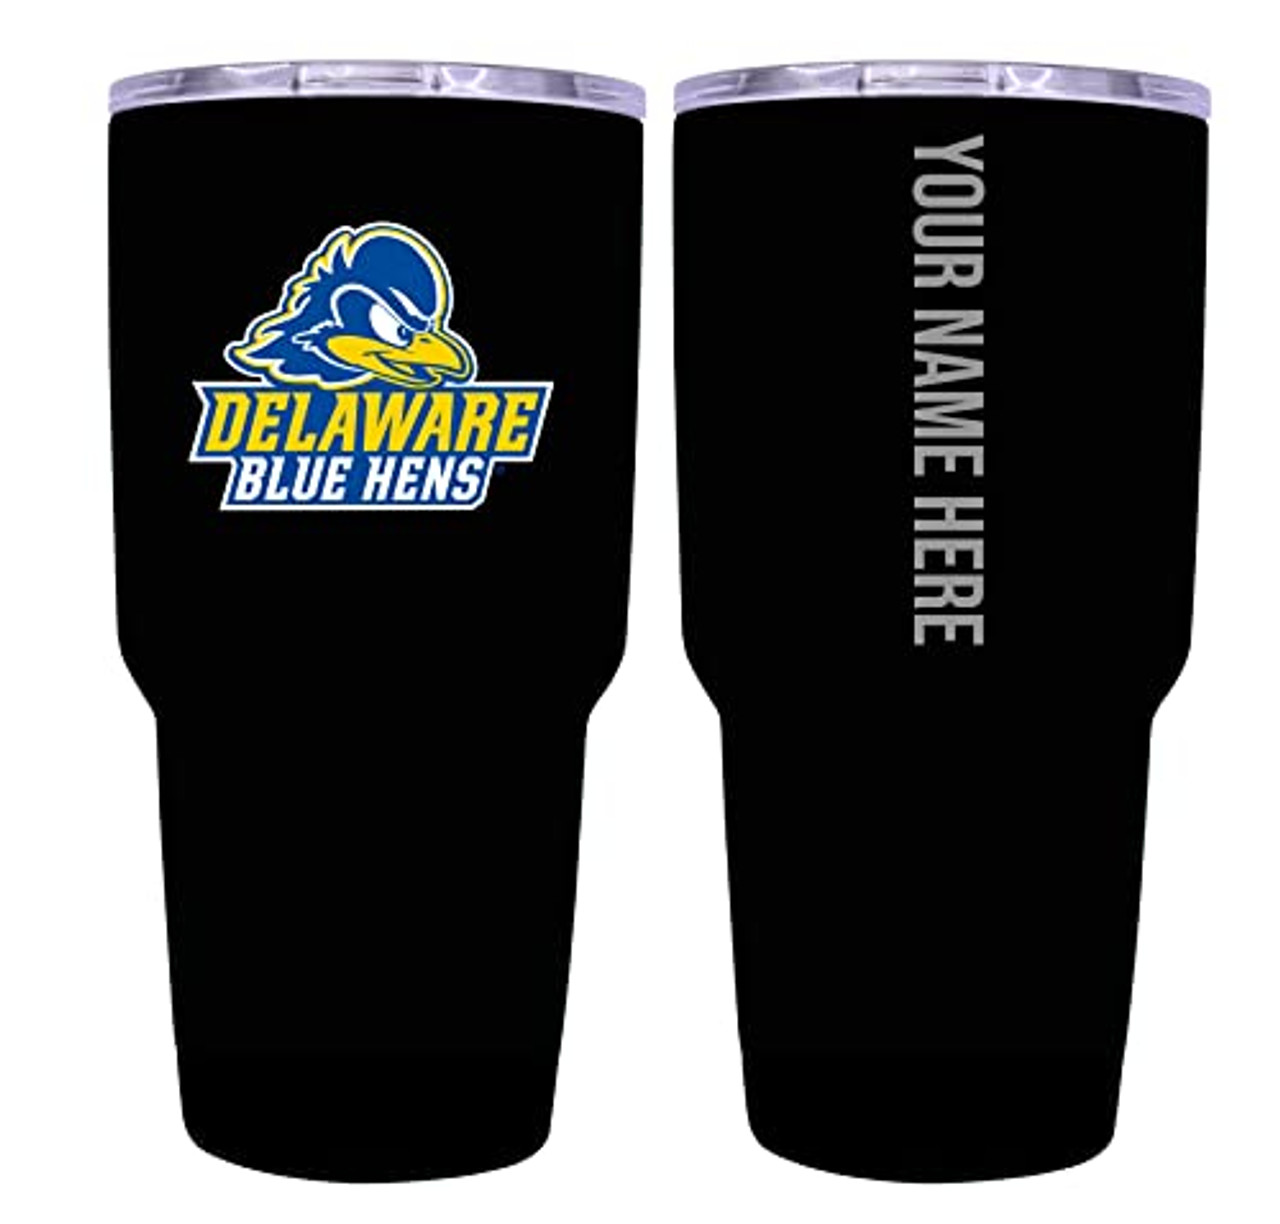 Collegiate Custom Personalized Delaware Blue Hens, 24 oz Insulated Stainless Steel Tumbler with Engraved Name (Black)